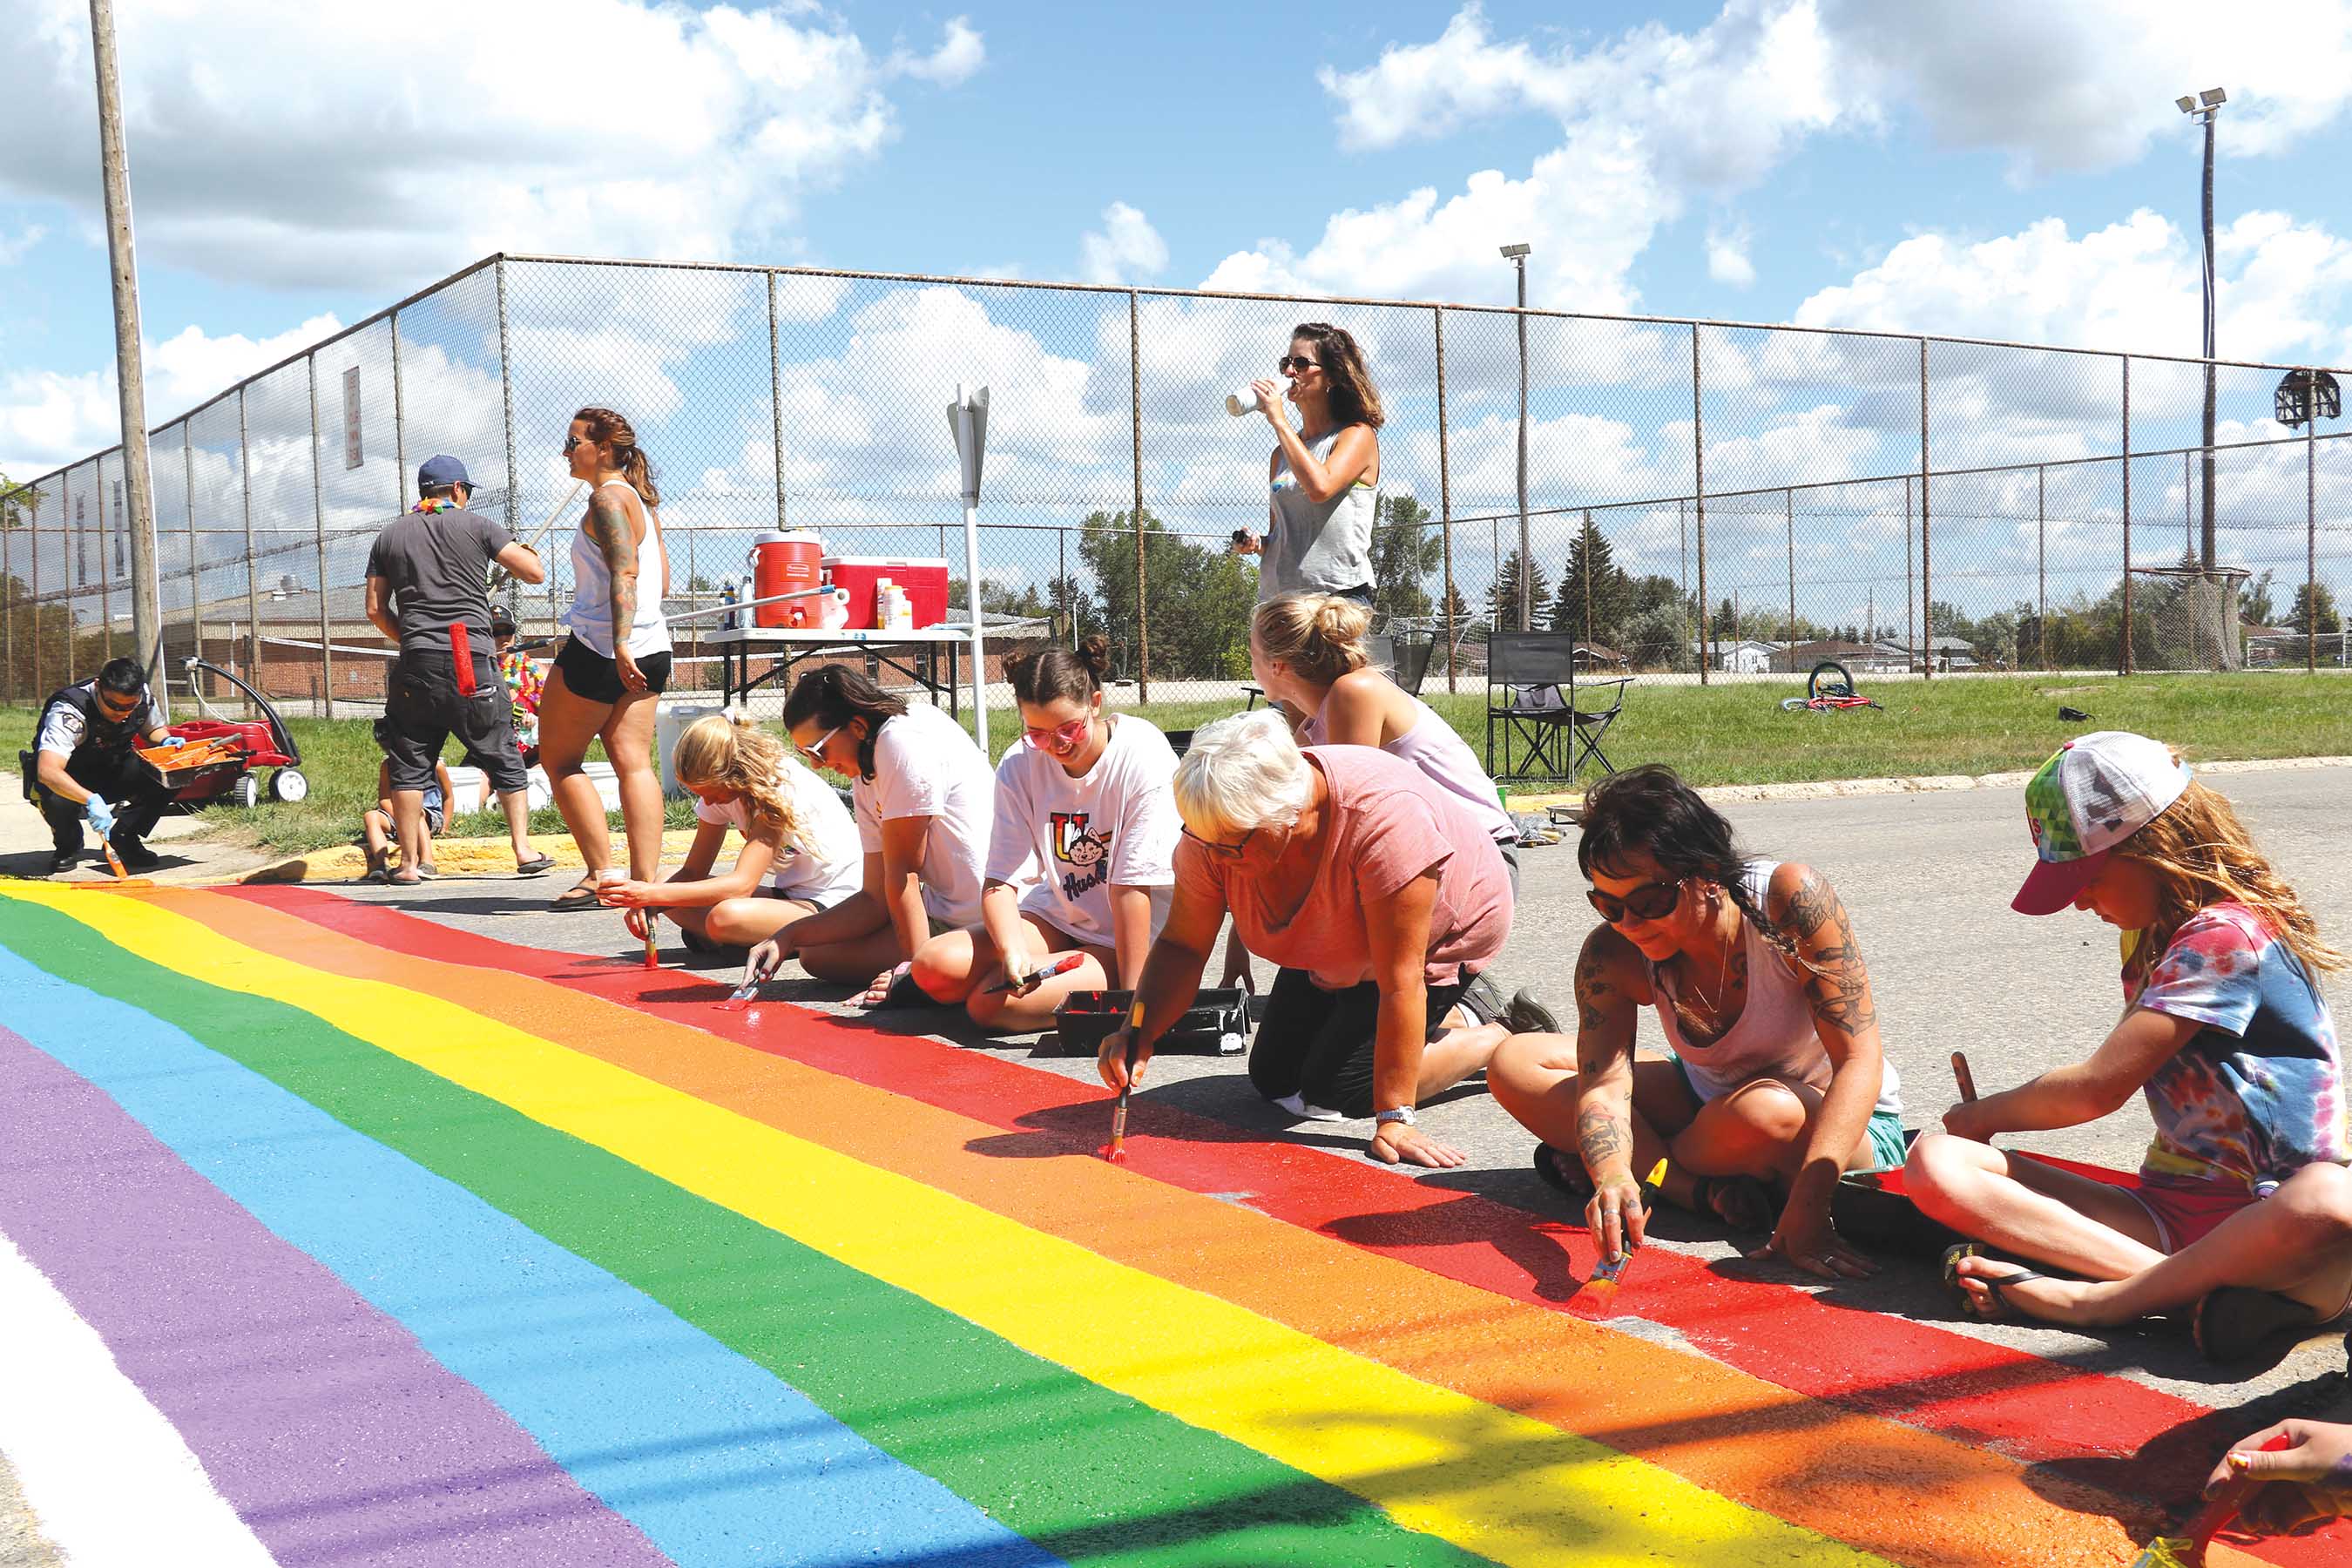 Volunteers painting a rainbow crosswalk in Redvers last year. The project brought lots of community members out, including the local RCMP who helped paint and wore RCMP vests with rainbow letters that day.